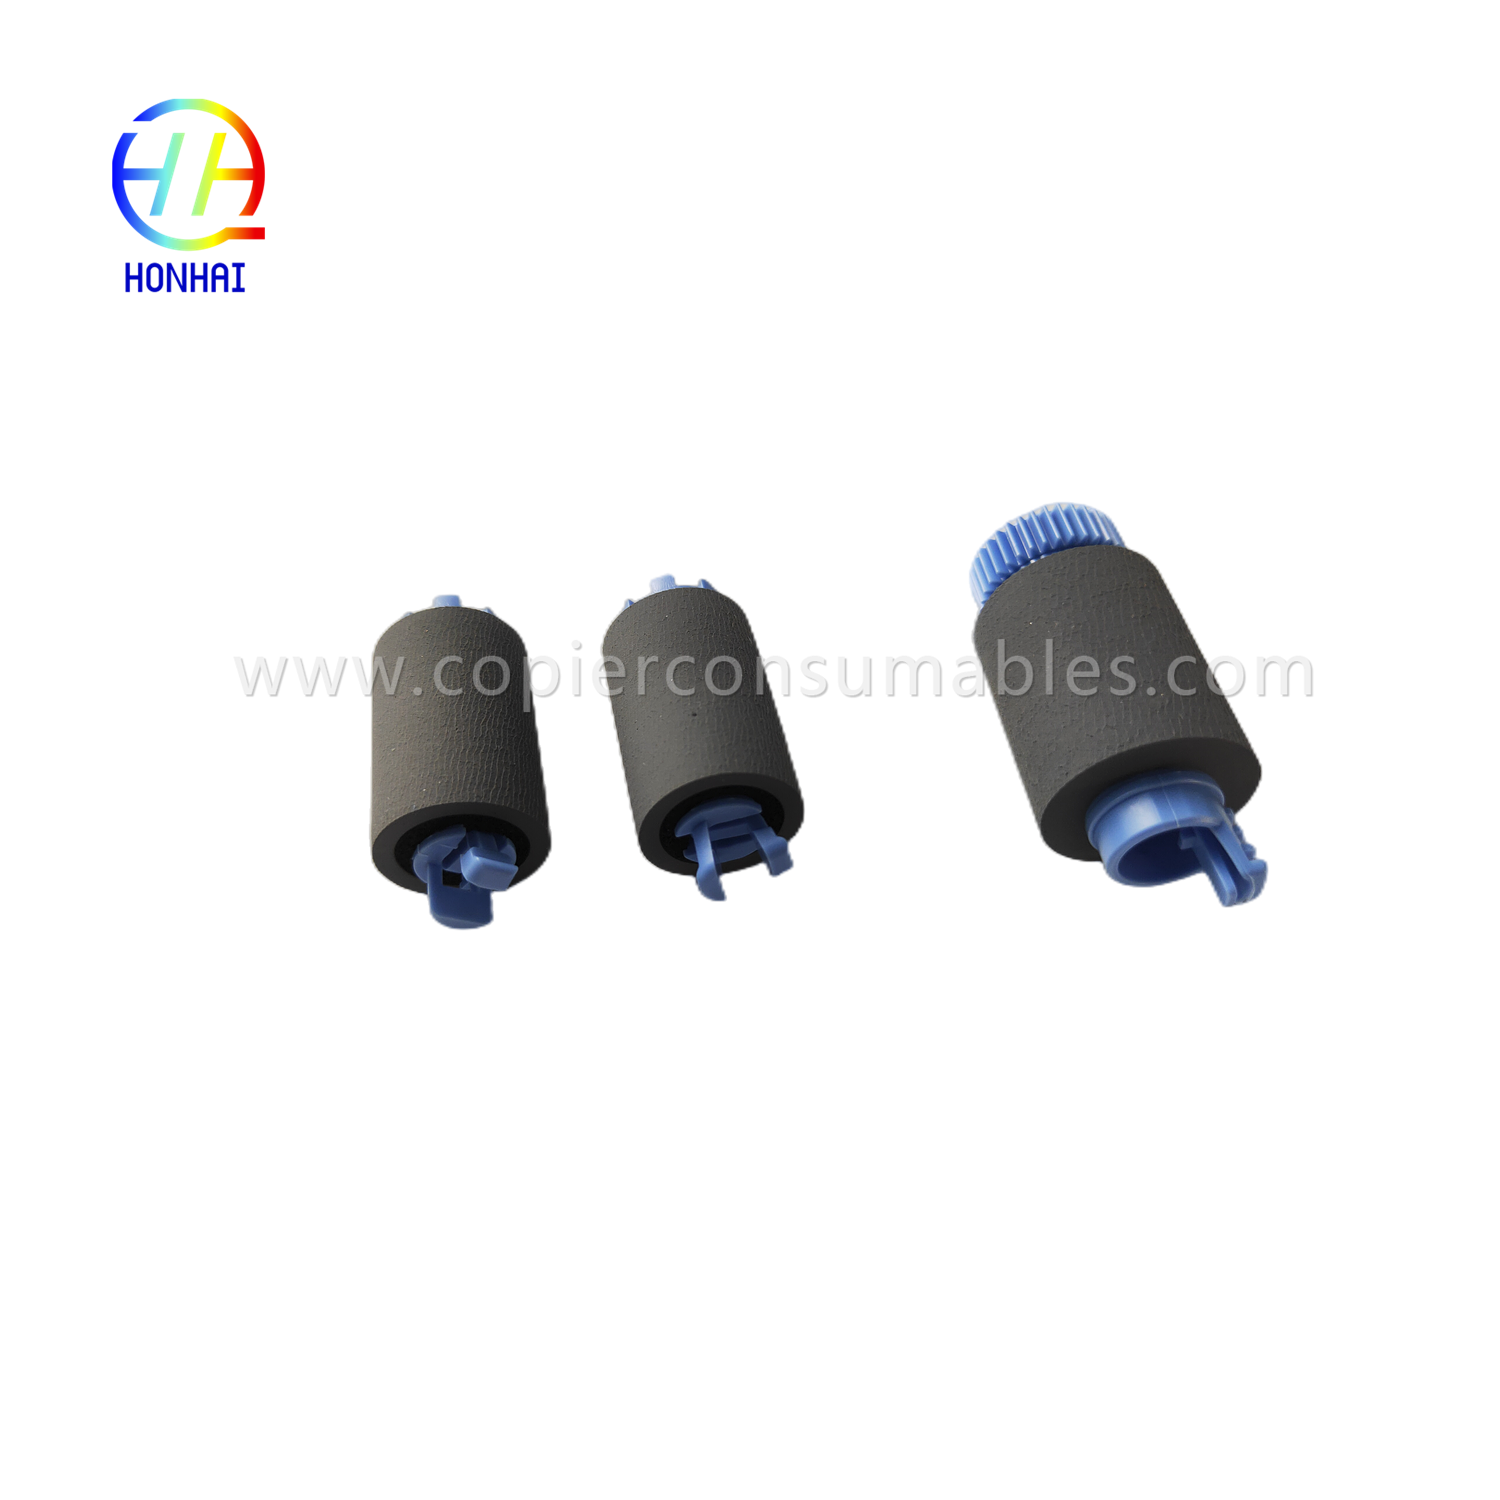 https://c585.goodao.net/tray-2-5-pickup-feed-separation-roller-set-for-hp-a7w93-67082-mfp-785f-780dn-e77650z-e77660z-e77650dn-e74076 p77750z-p77760z-p75050dn-p75050dw-product/